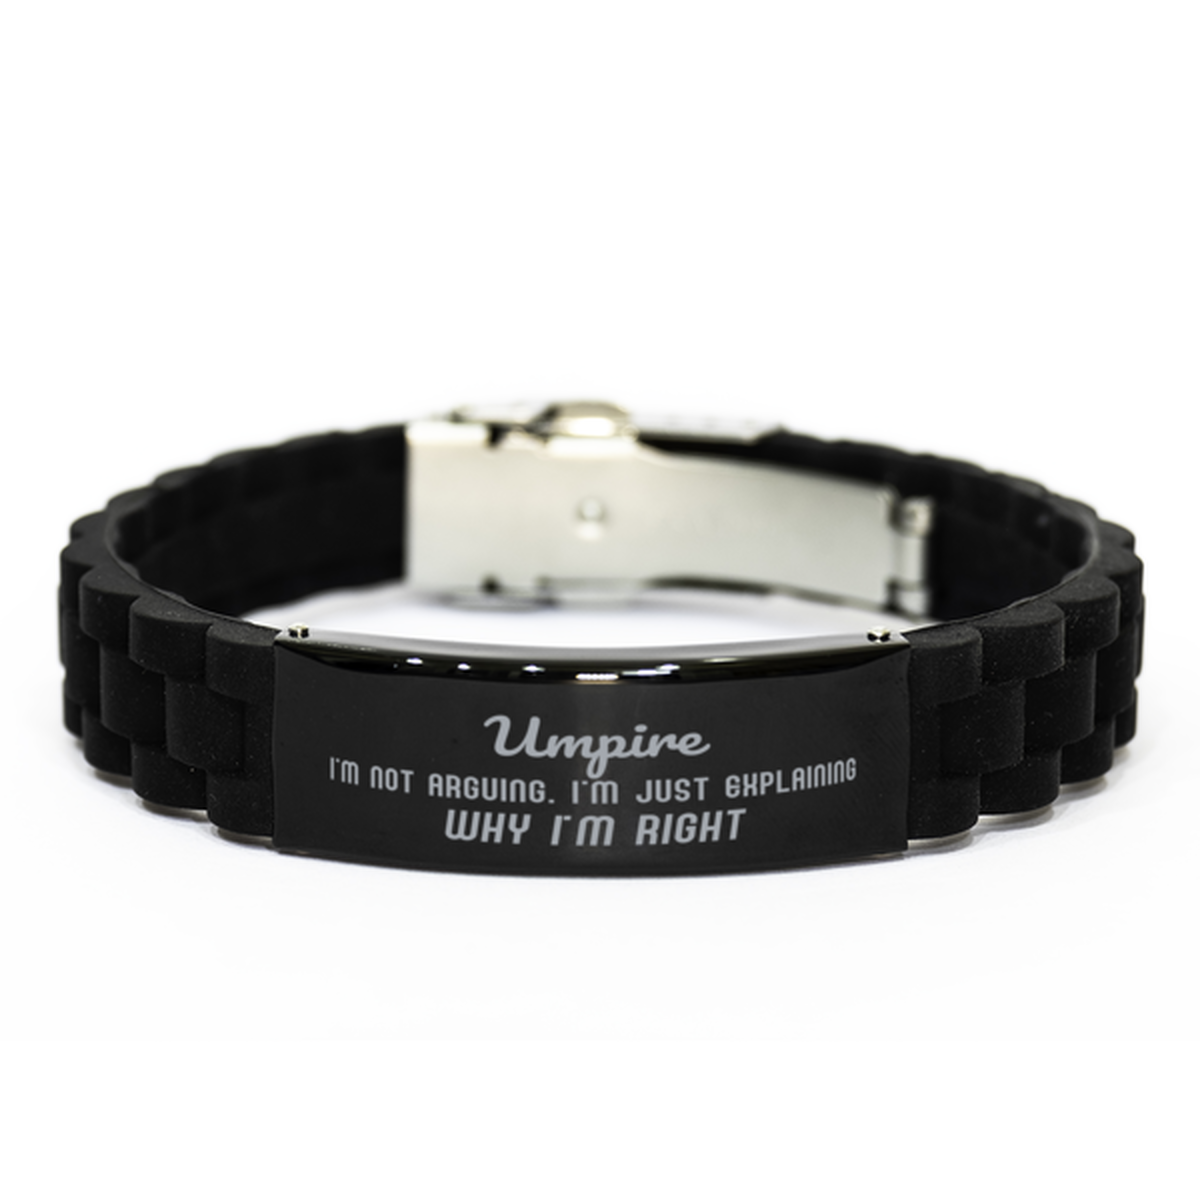 Umpire I'm not Arguing. I'm Just Explaining Why I'm RIGHT Black Glidelock Clasp Bracelet, Funny Saying Quote Umpire Gifts For Umpire Graduation Birthday Christmas Gifts for Men Women Coworker